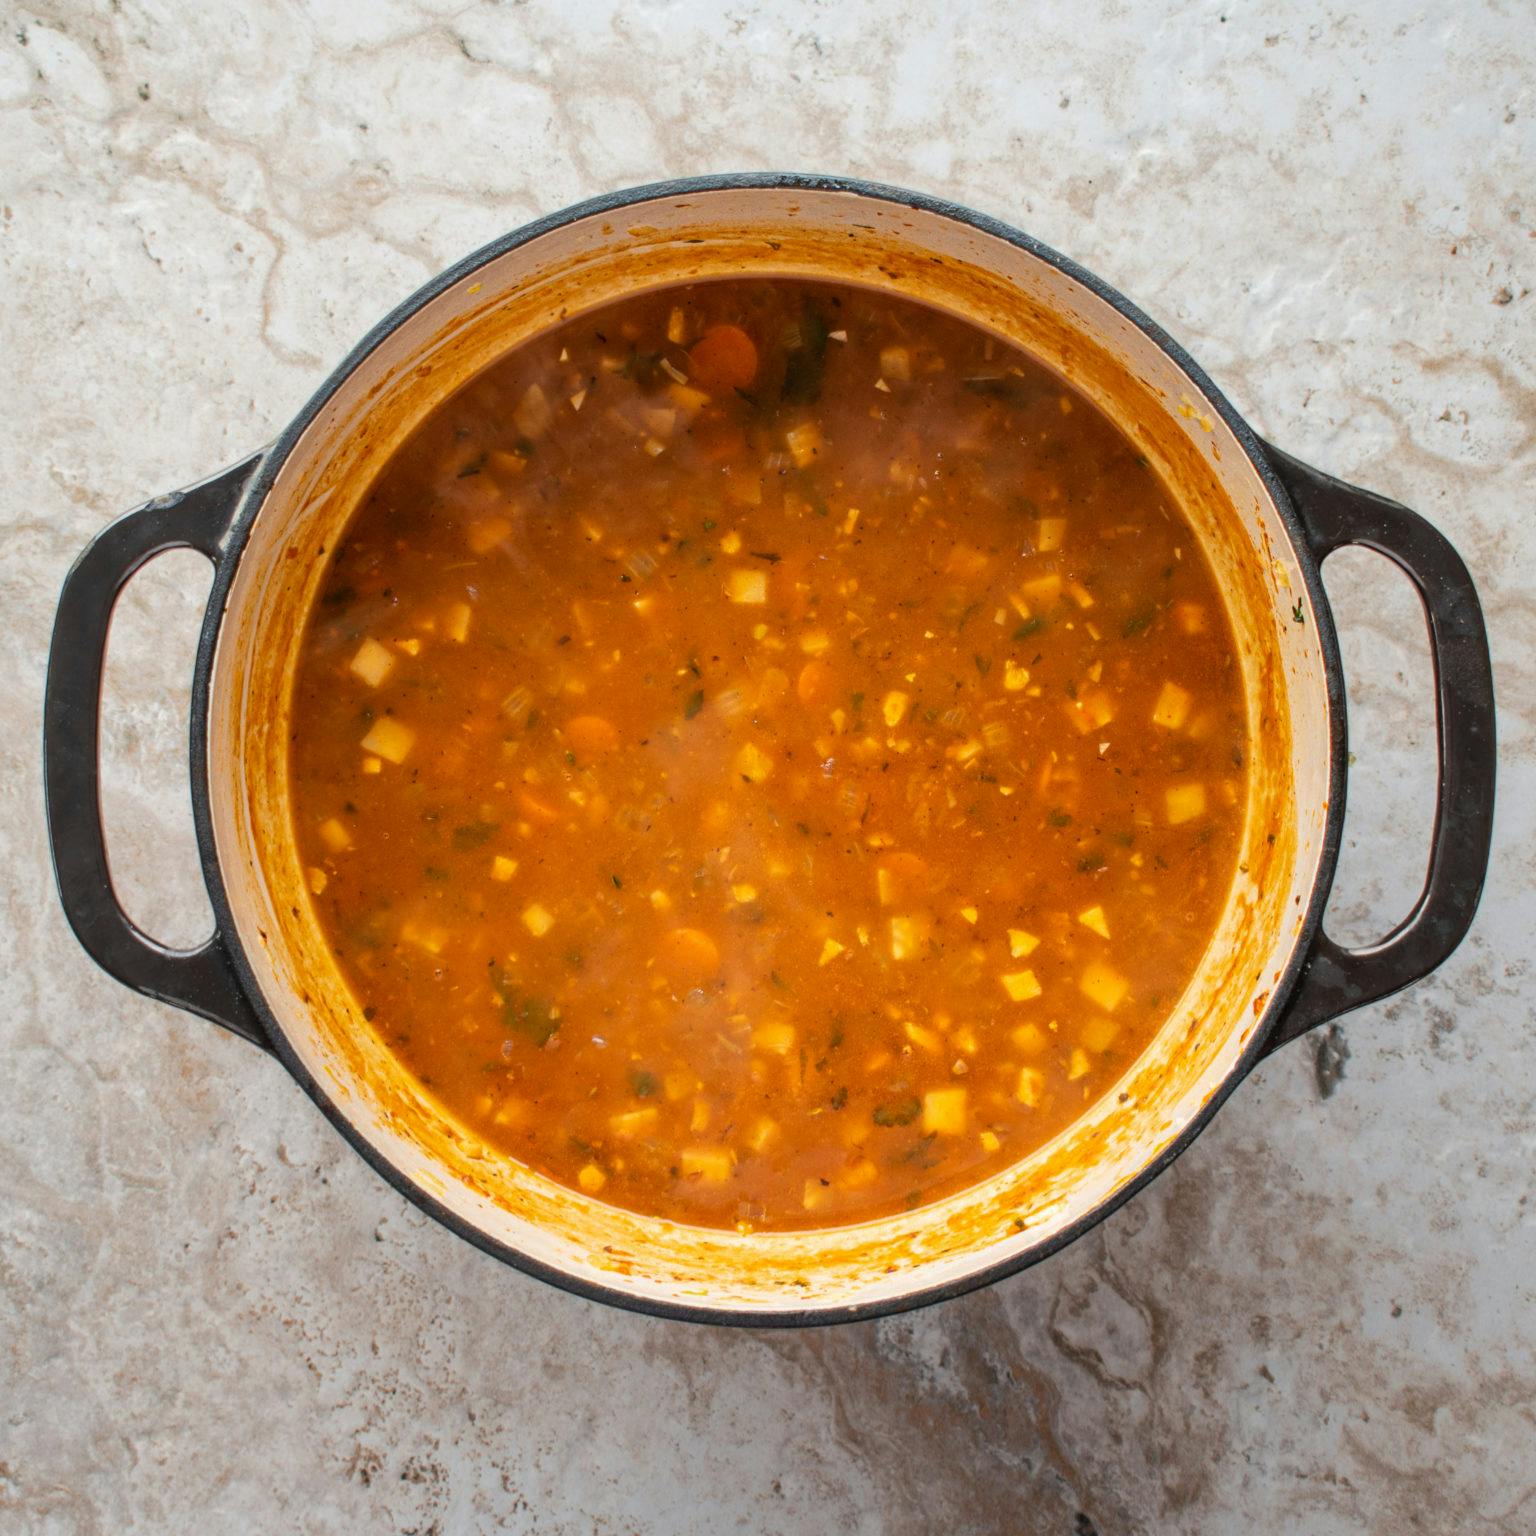 Cook soup
